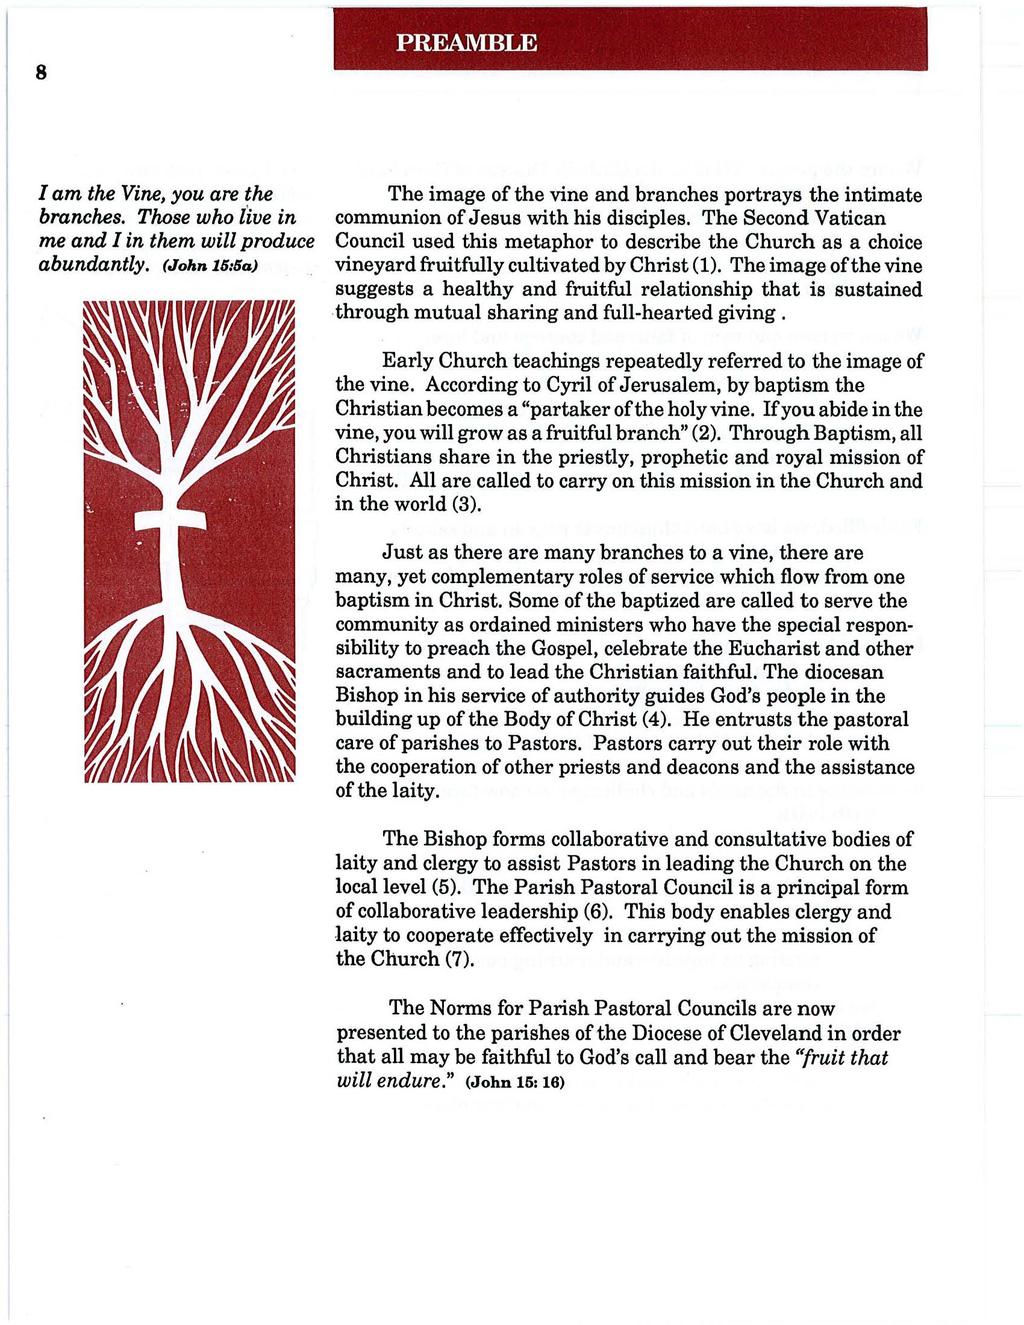 8 PREAMBLE I am the Vine, you are the branches. Those who llve in me and I in them will produce abundantly.